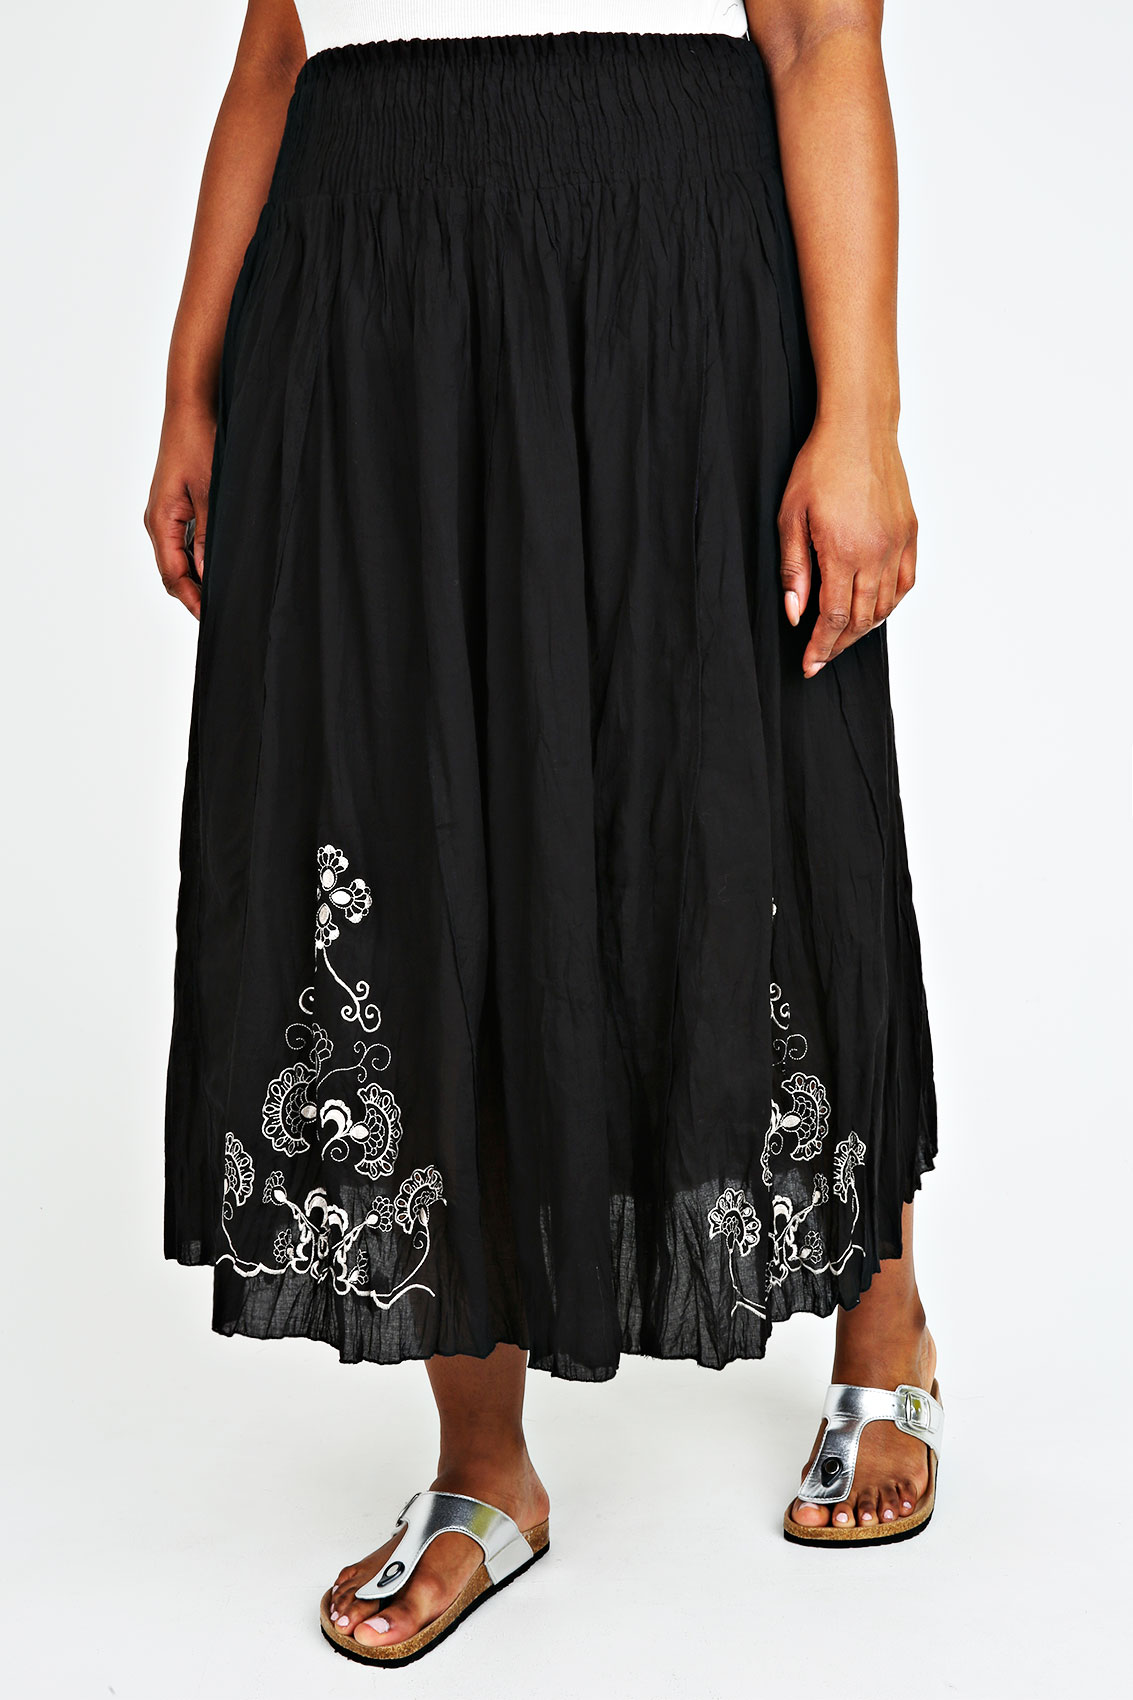 Black Cotton Maxi Skirt With Cream Embroidery Detail Plus Size 14 16 18 20 22 24 26 28 30 32 34 36